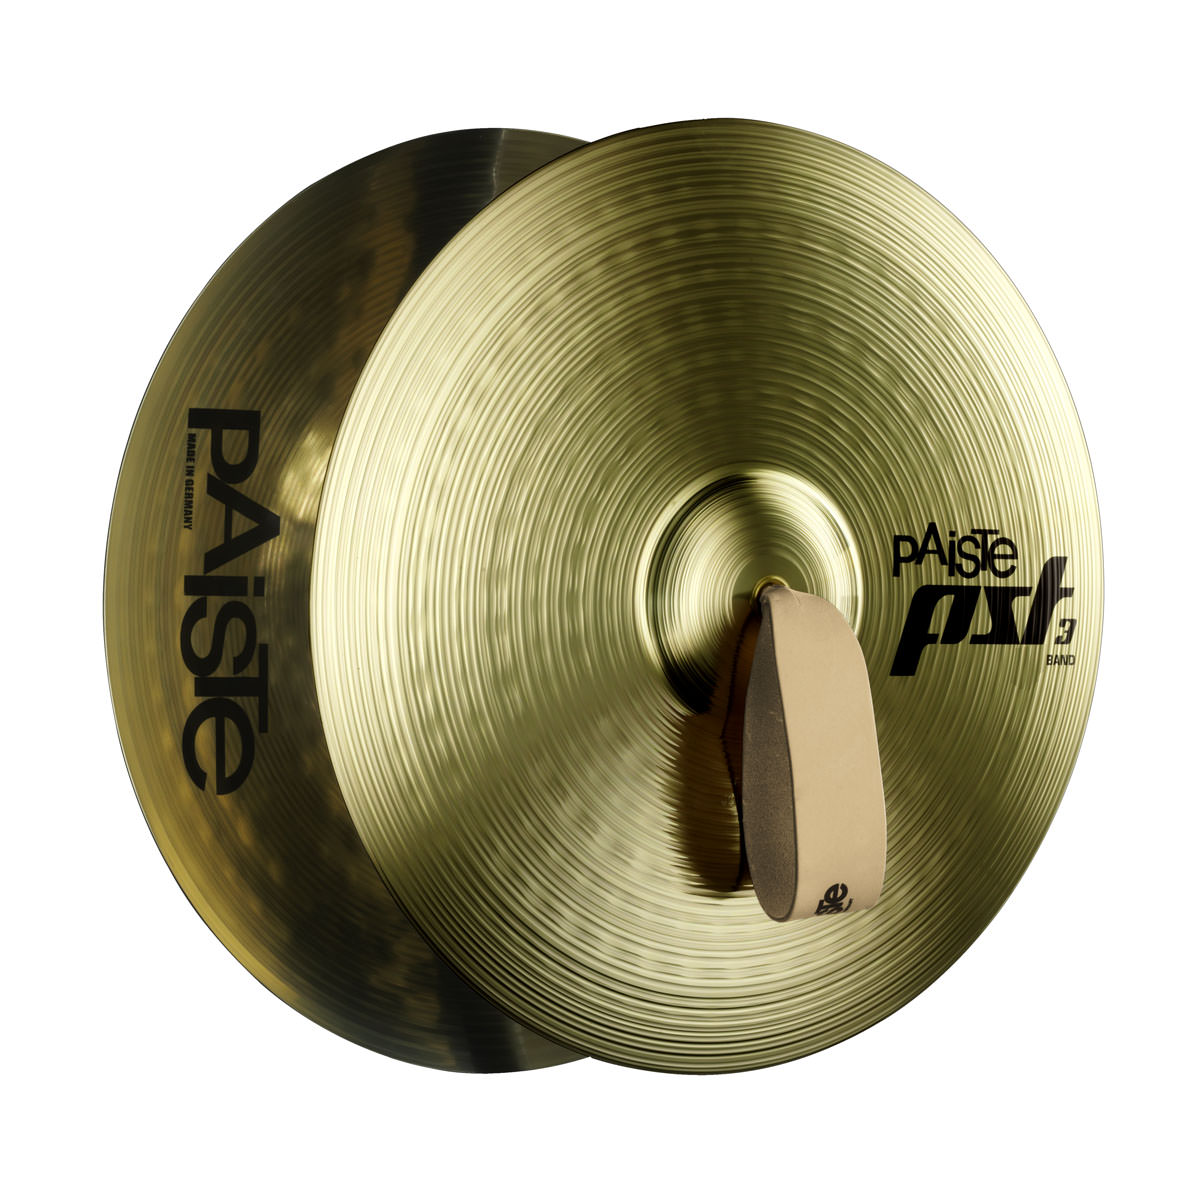 Paiste PST 3 16" Marching Band Cymbals (Pair)